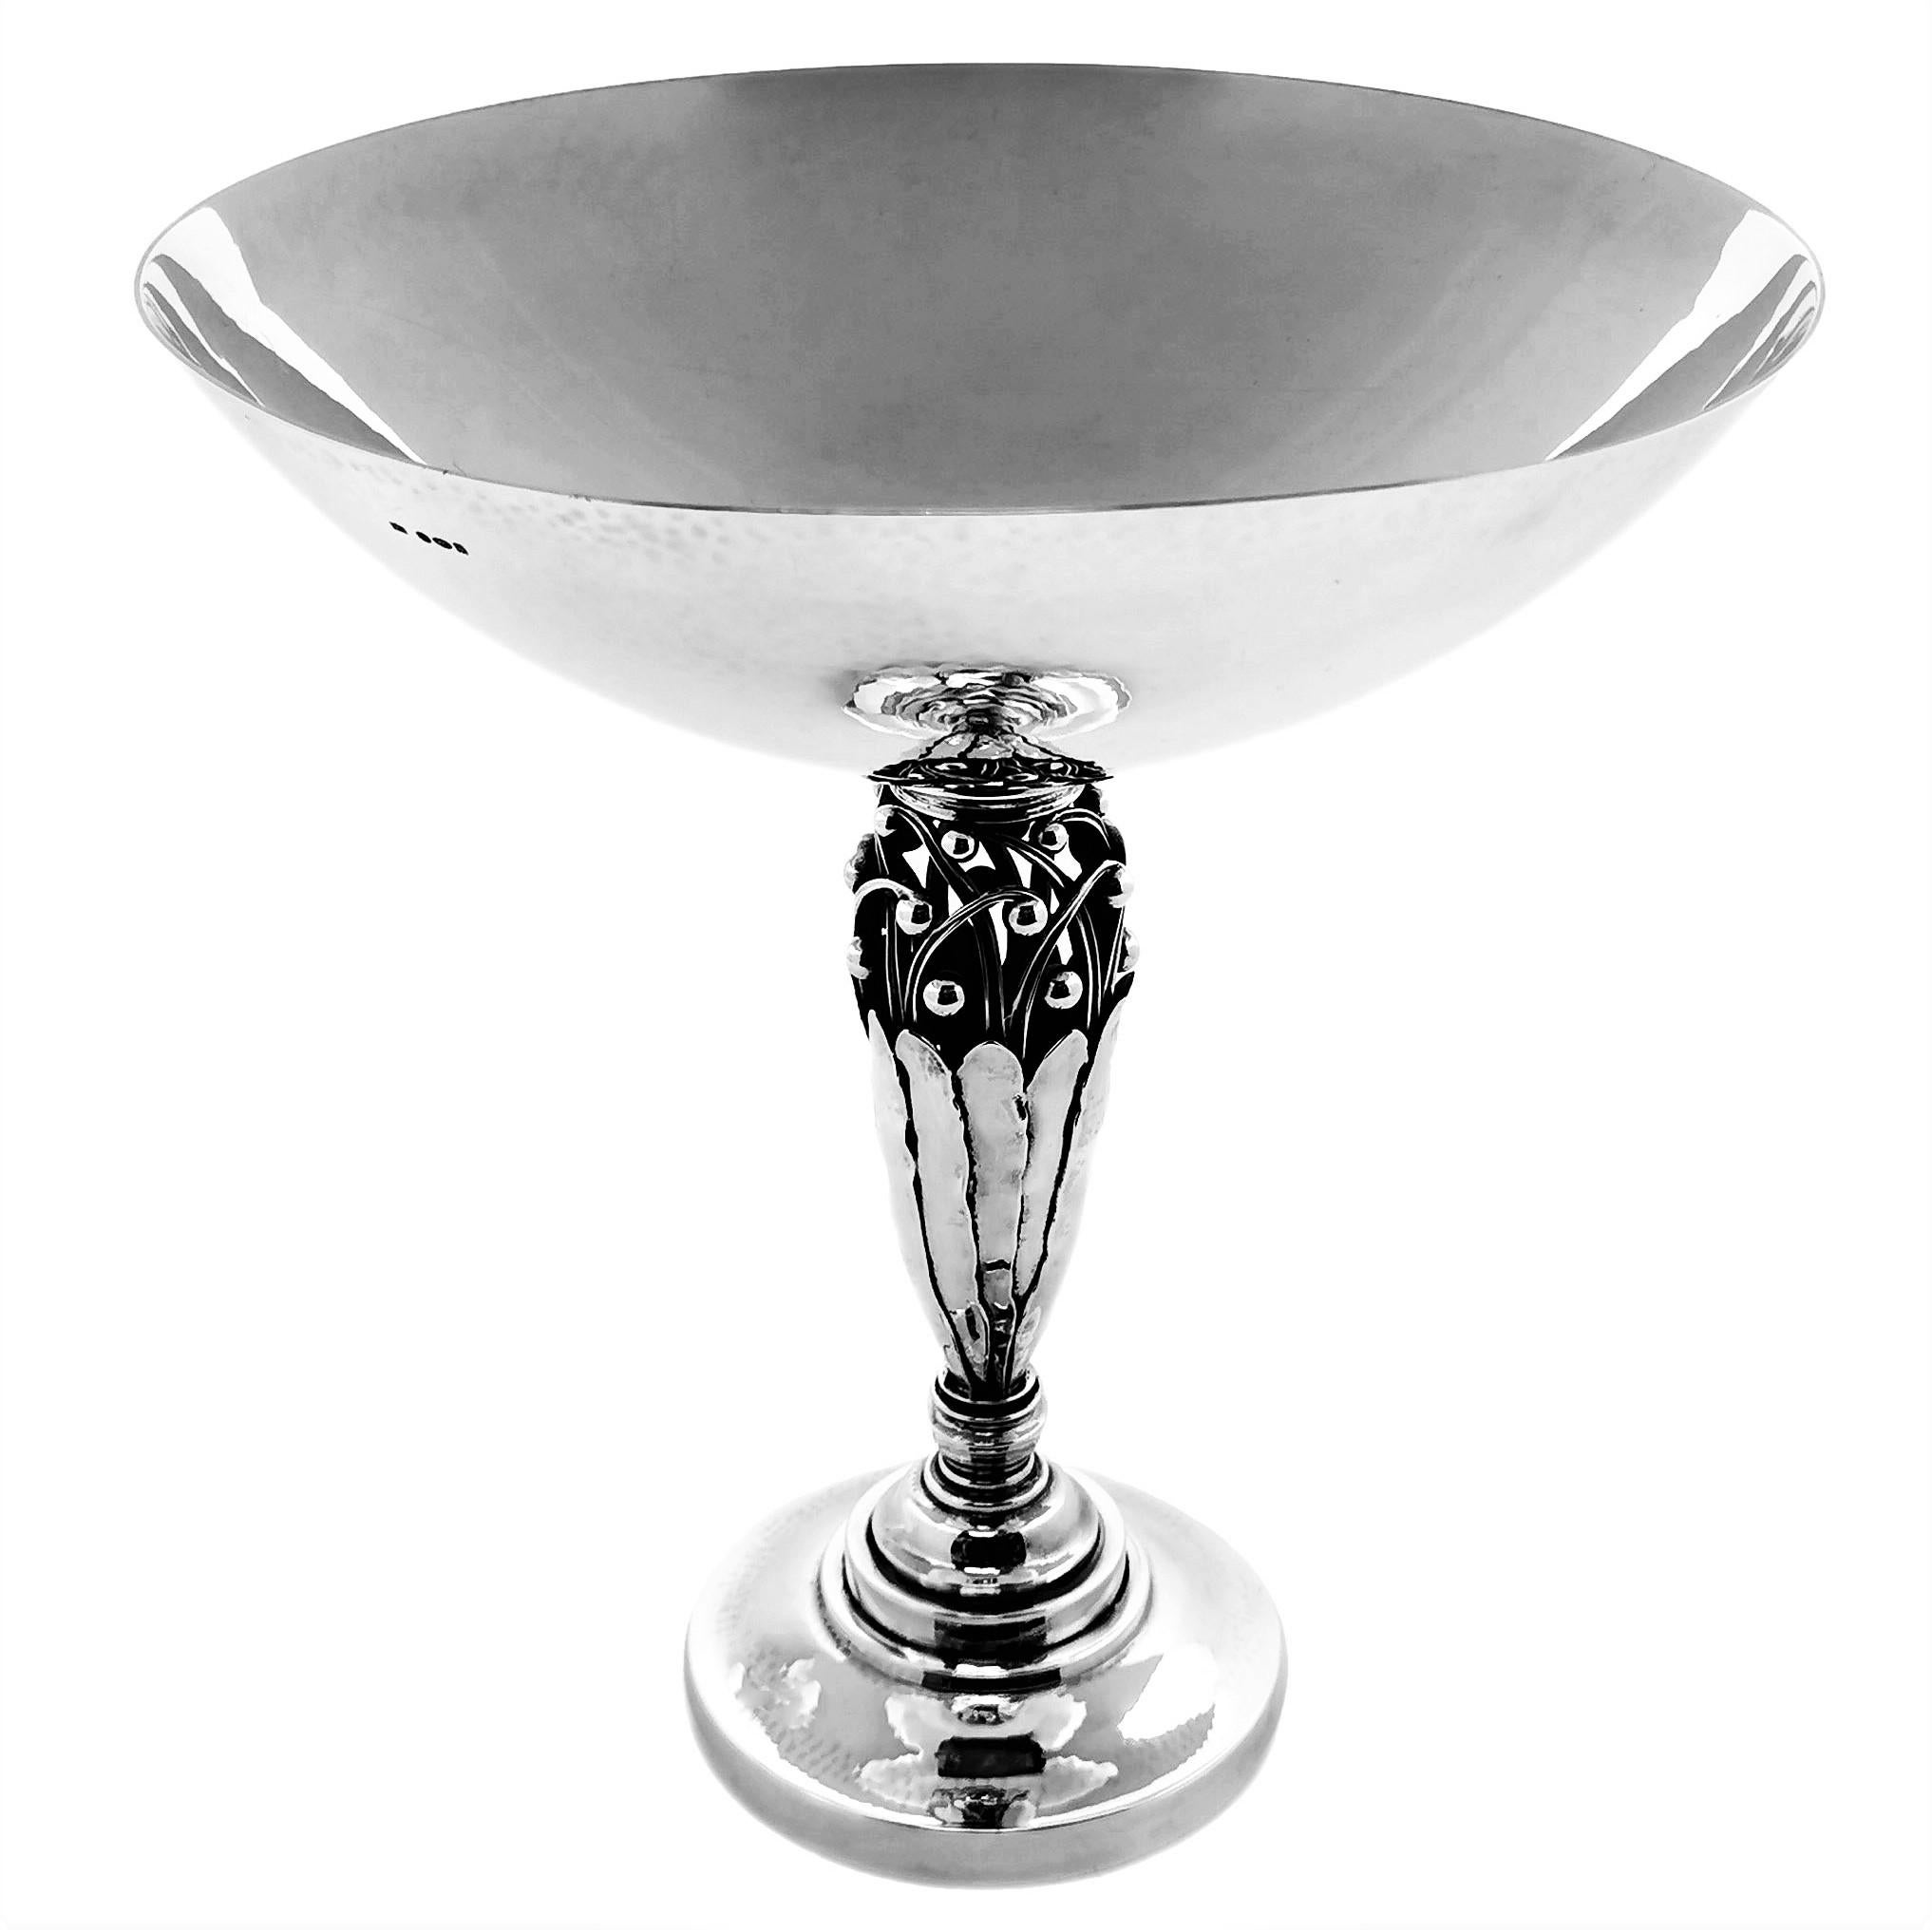 A beautiful Georg Jensen solid Silver Compote with a wide hammered silver bowl on a stylised leaf and floral column on a spread foot. The Comport was Design by Johan Rohde and made by Georg Jensen and is design number 574. 

Made in Copenhagen